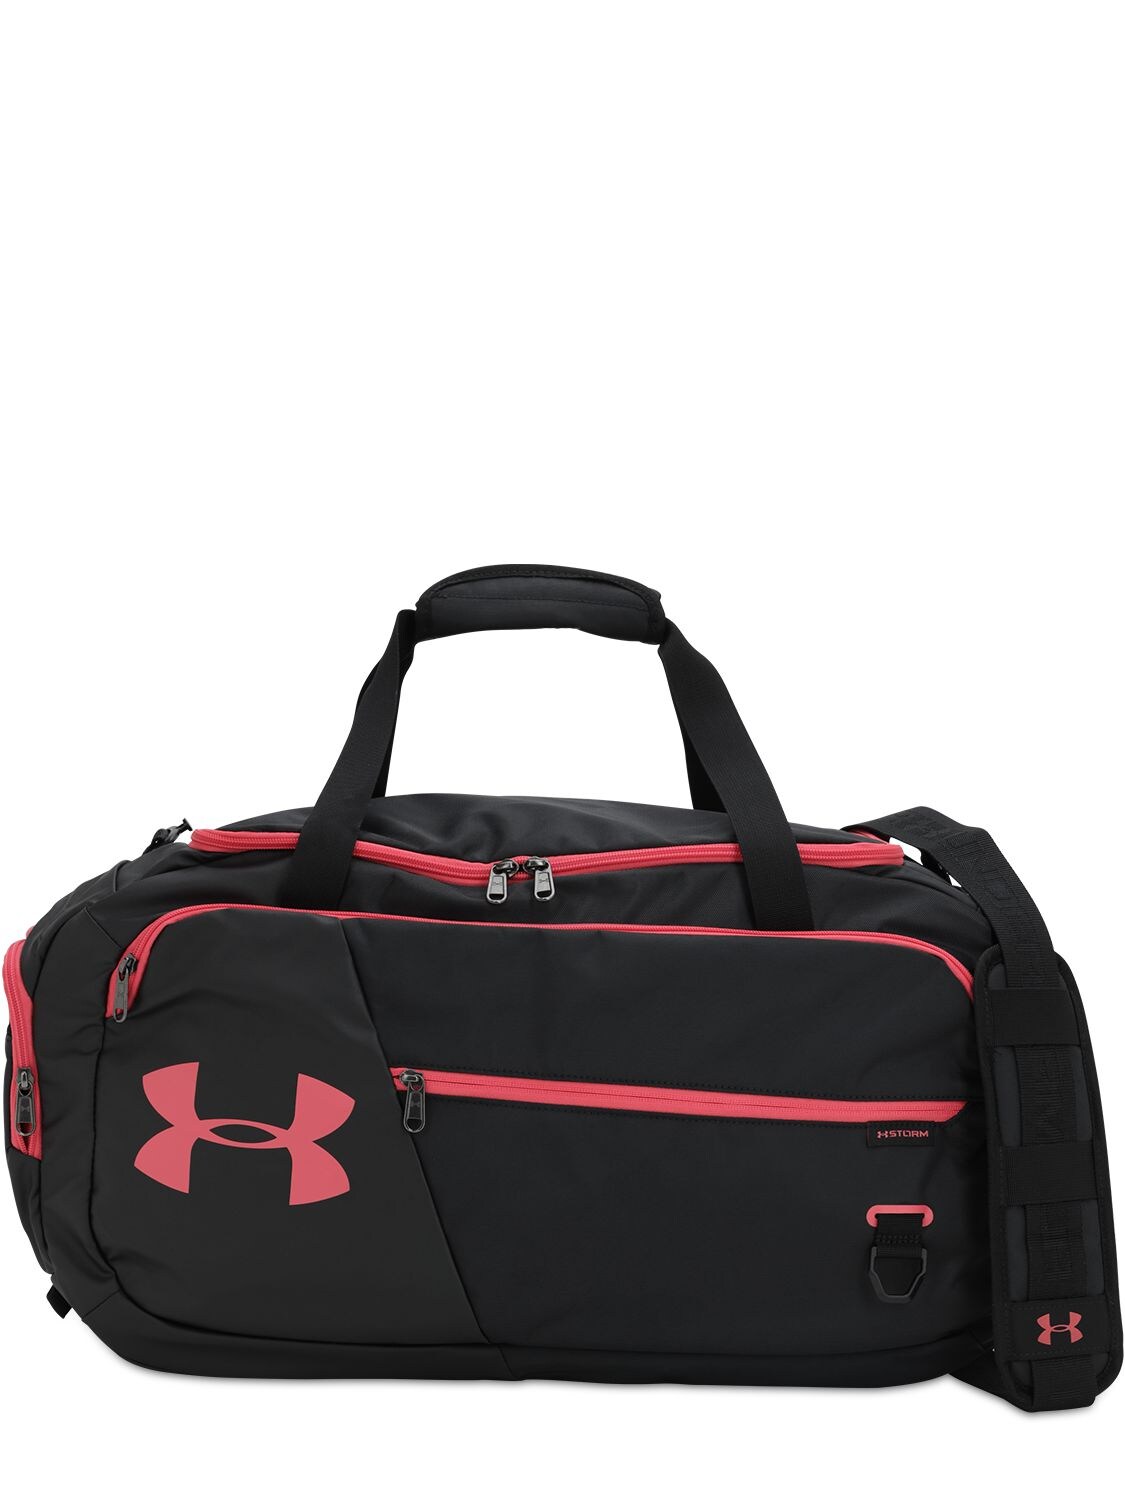 Under Armour 4.0 Md Duffel Bag In Black,coral